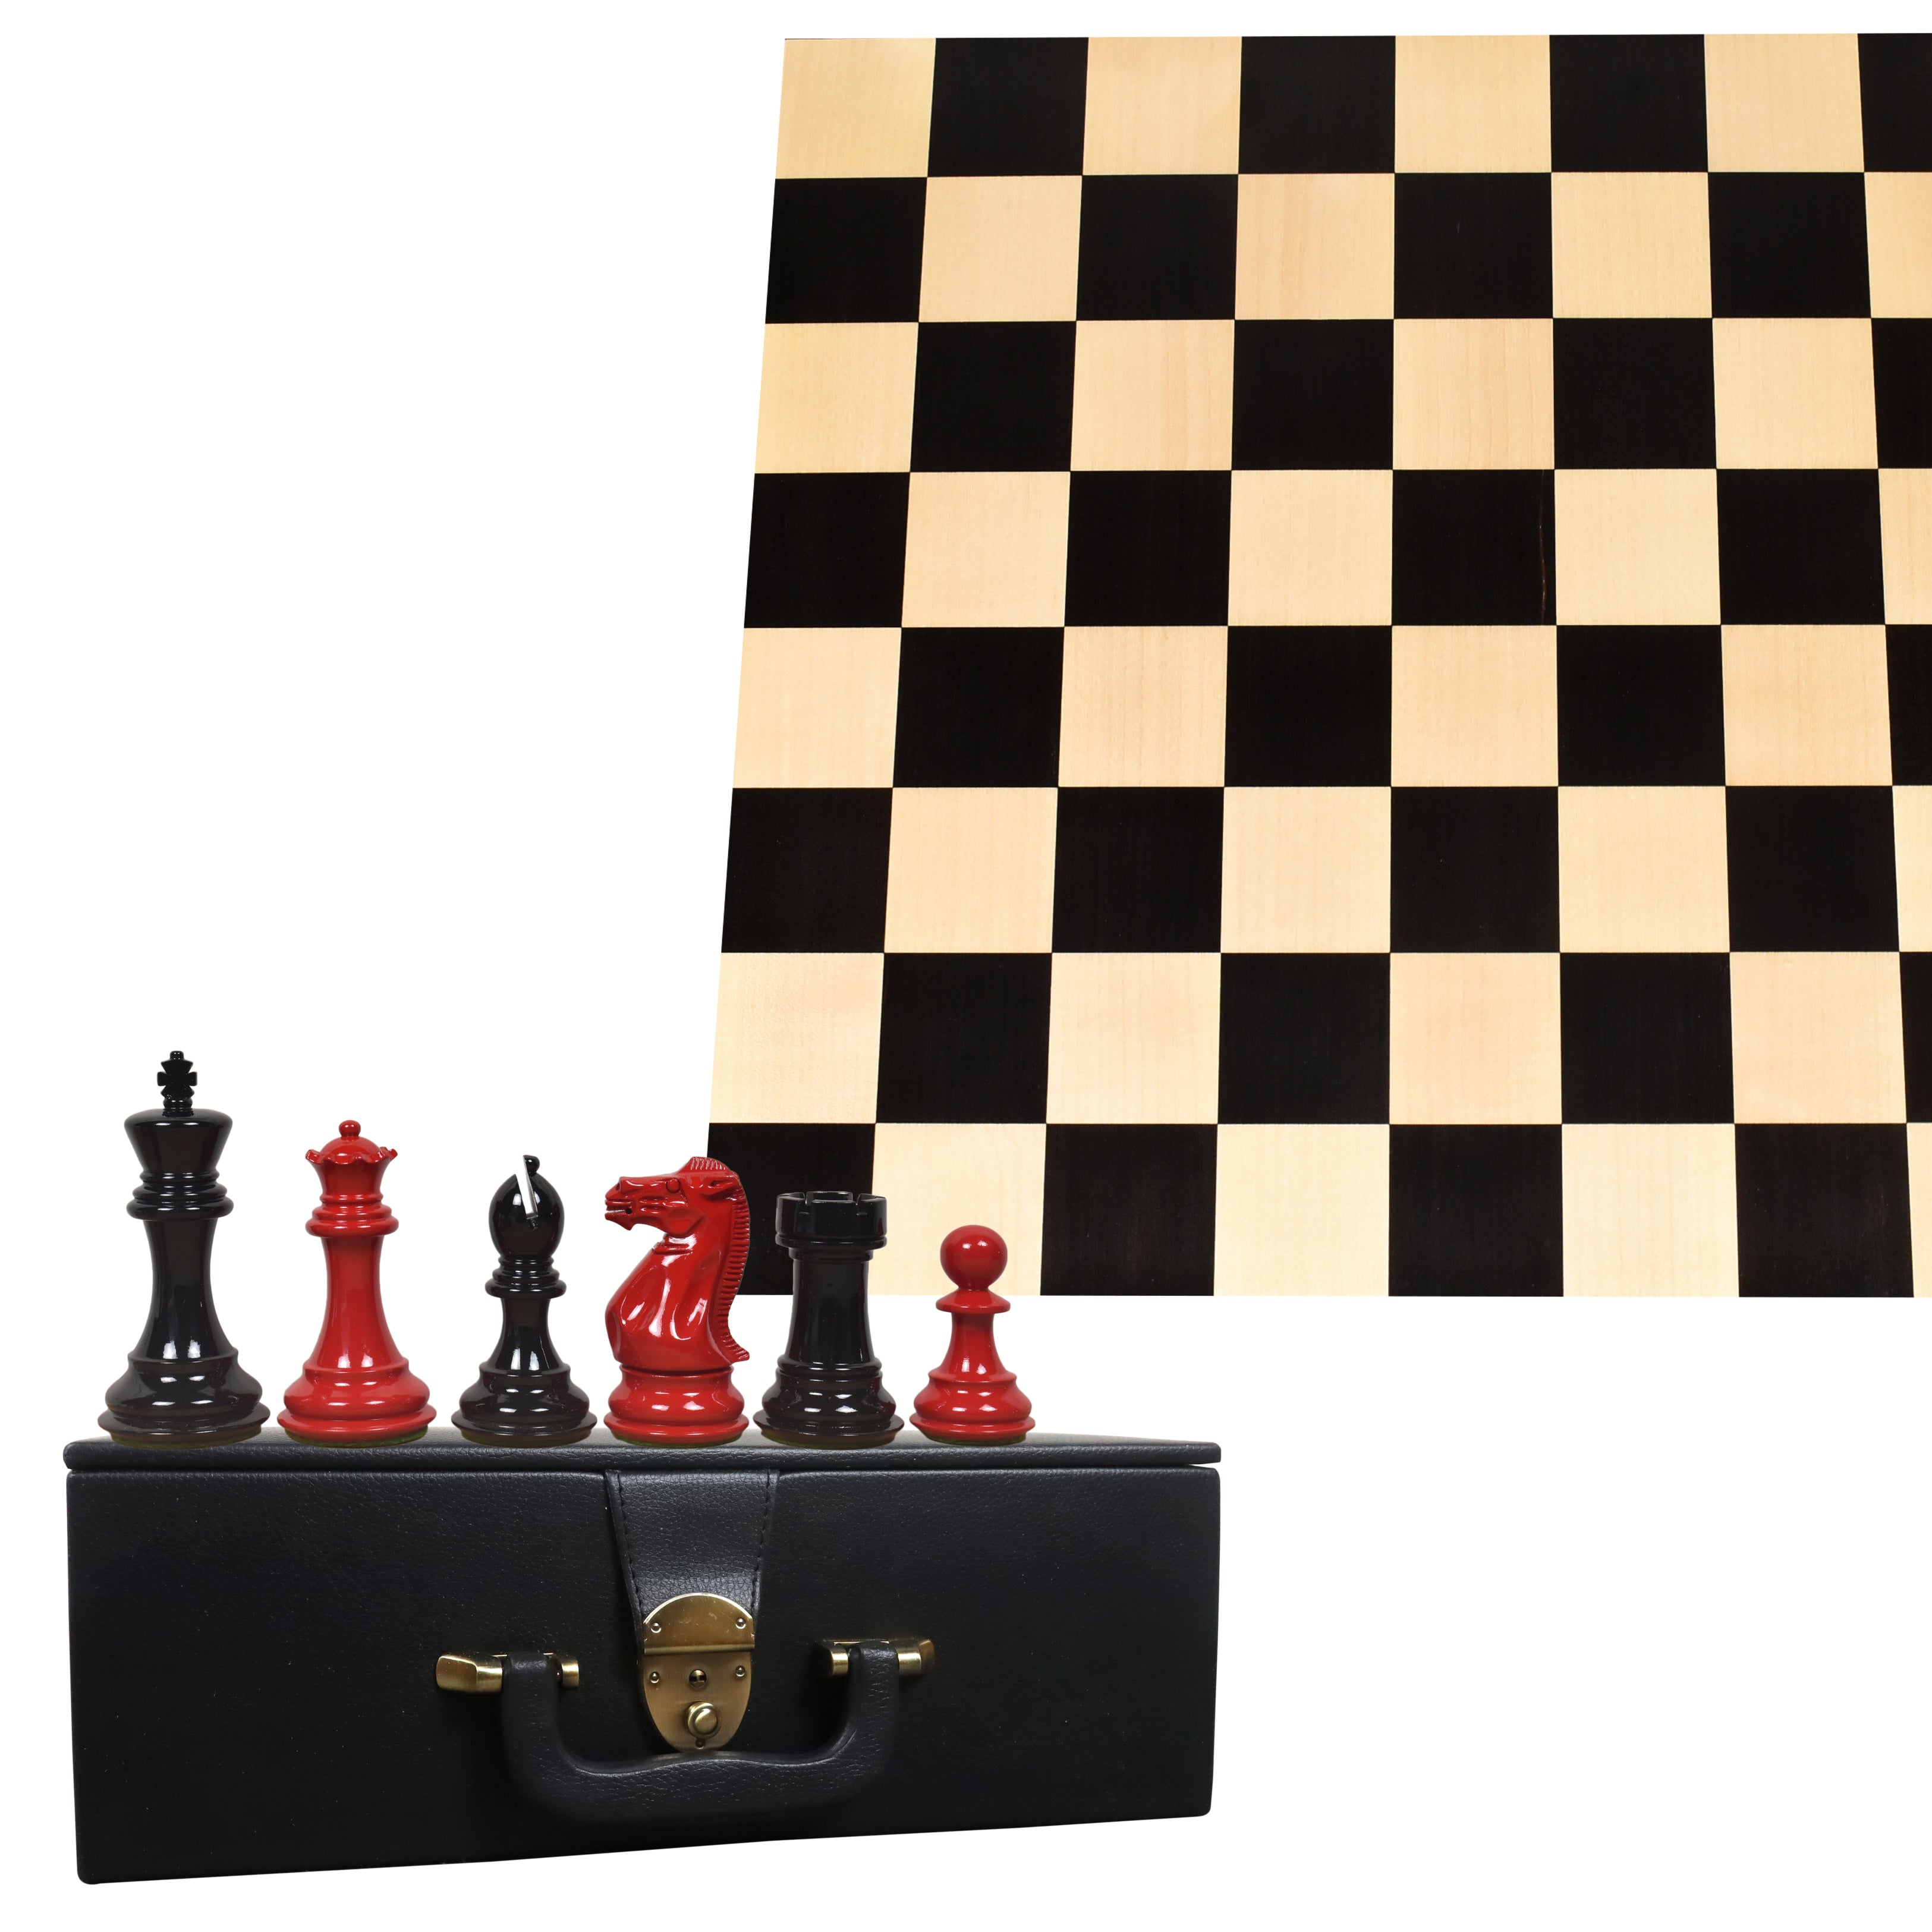 4.1" Pro Staunton Weighted Red & Black Painted Wooden Chess Pieces With Borderless 55 Mm Square Chess Board In Solid Ebony & Maple Wood And Leatherette Coffer Storage Box